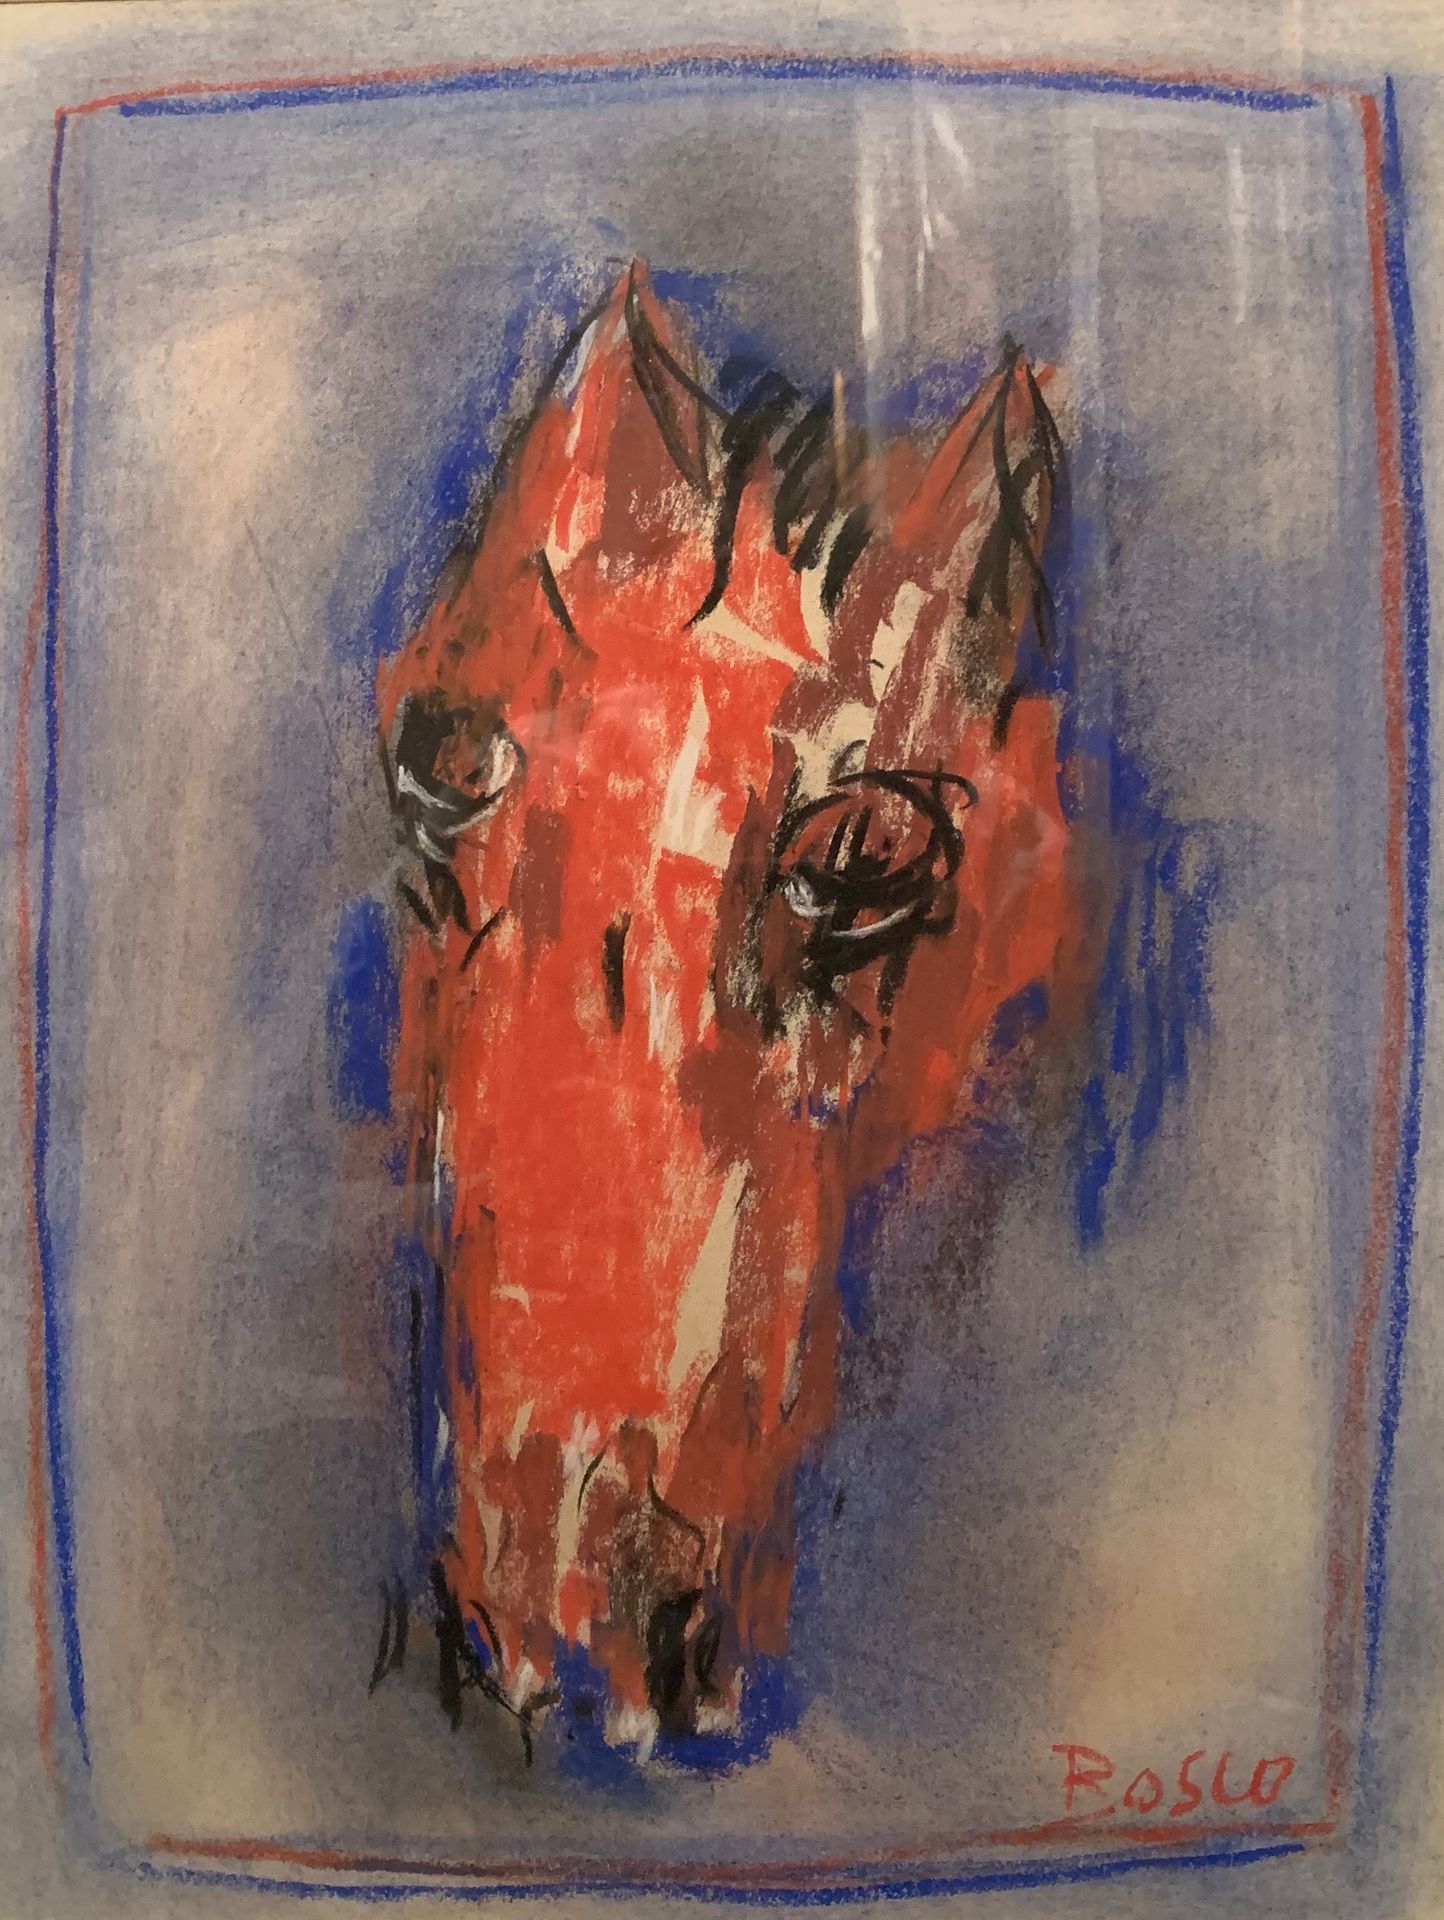 Null Pierre BOSCO (1909-1993)

Head of a horse

Pastel signed lower right

42 x &hellip;